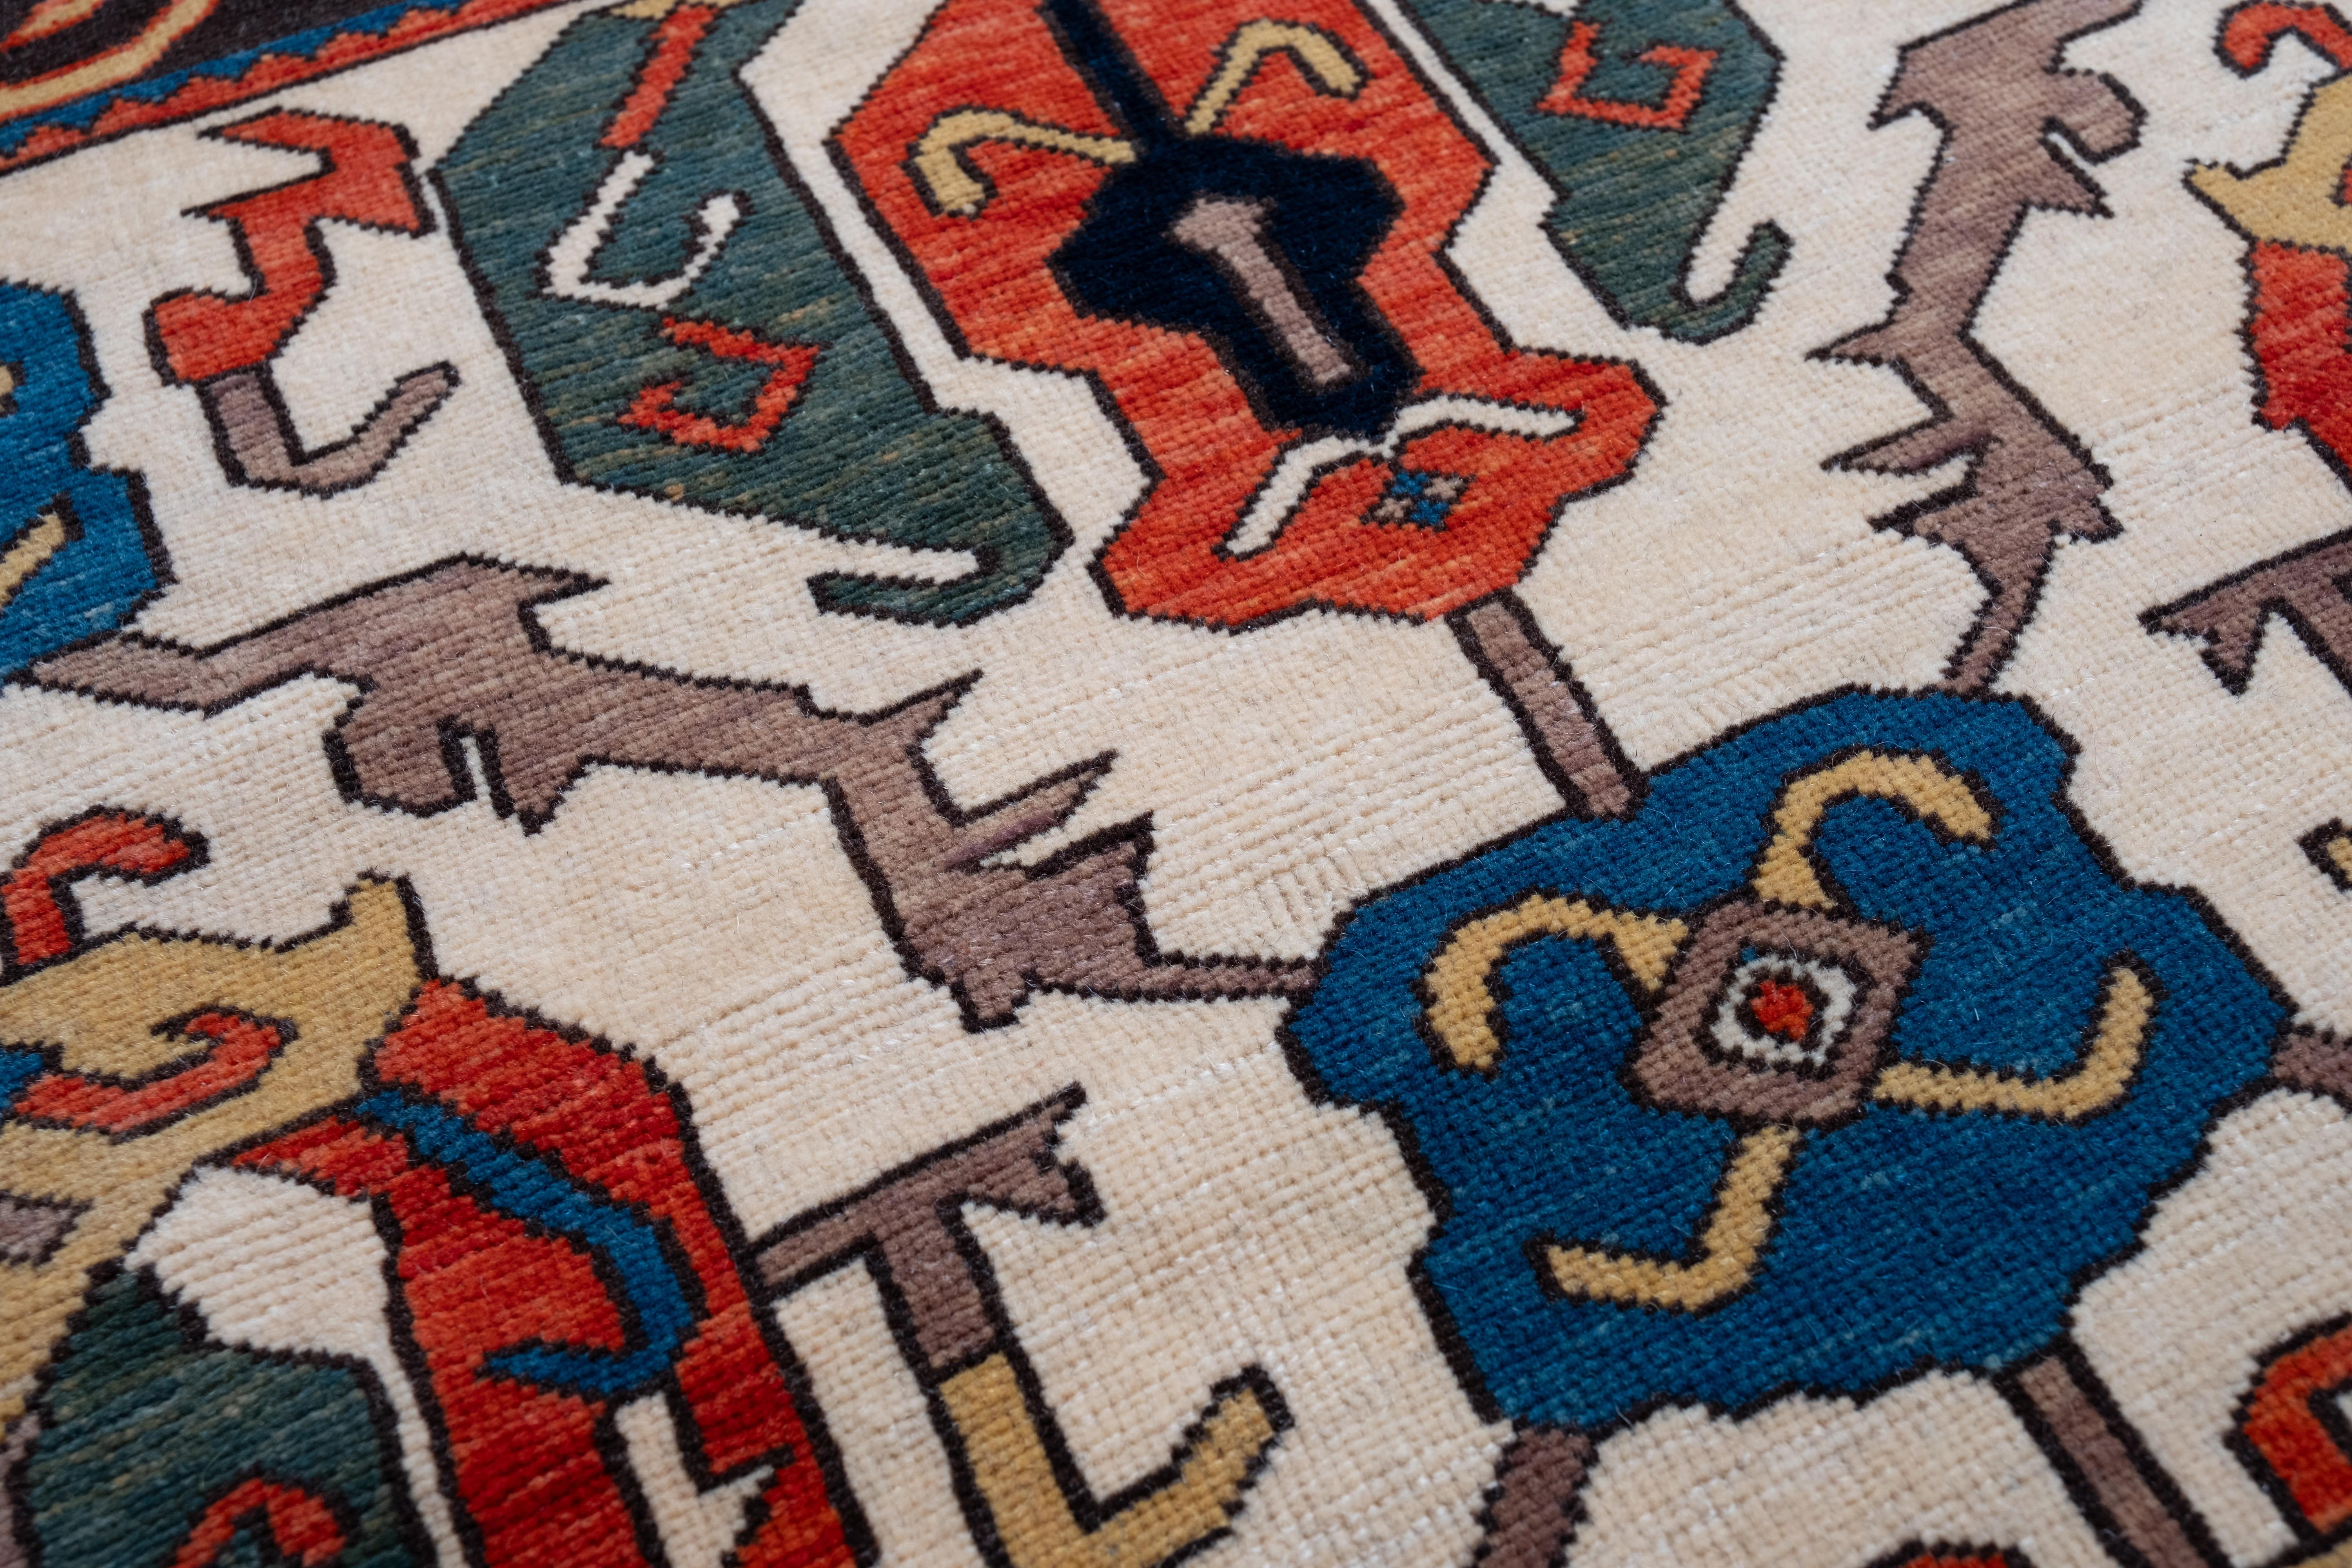 Contemporary Ararat Rugs Kuba Rug with Palmettes Caucasian 19th C. Revival Rug, Natural Dyed For Sale